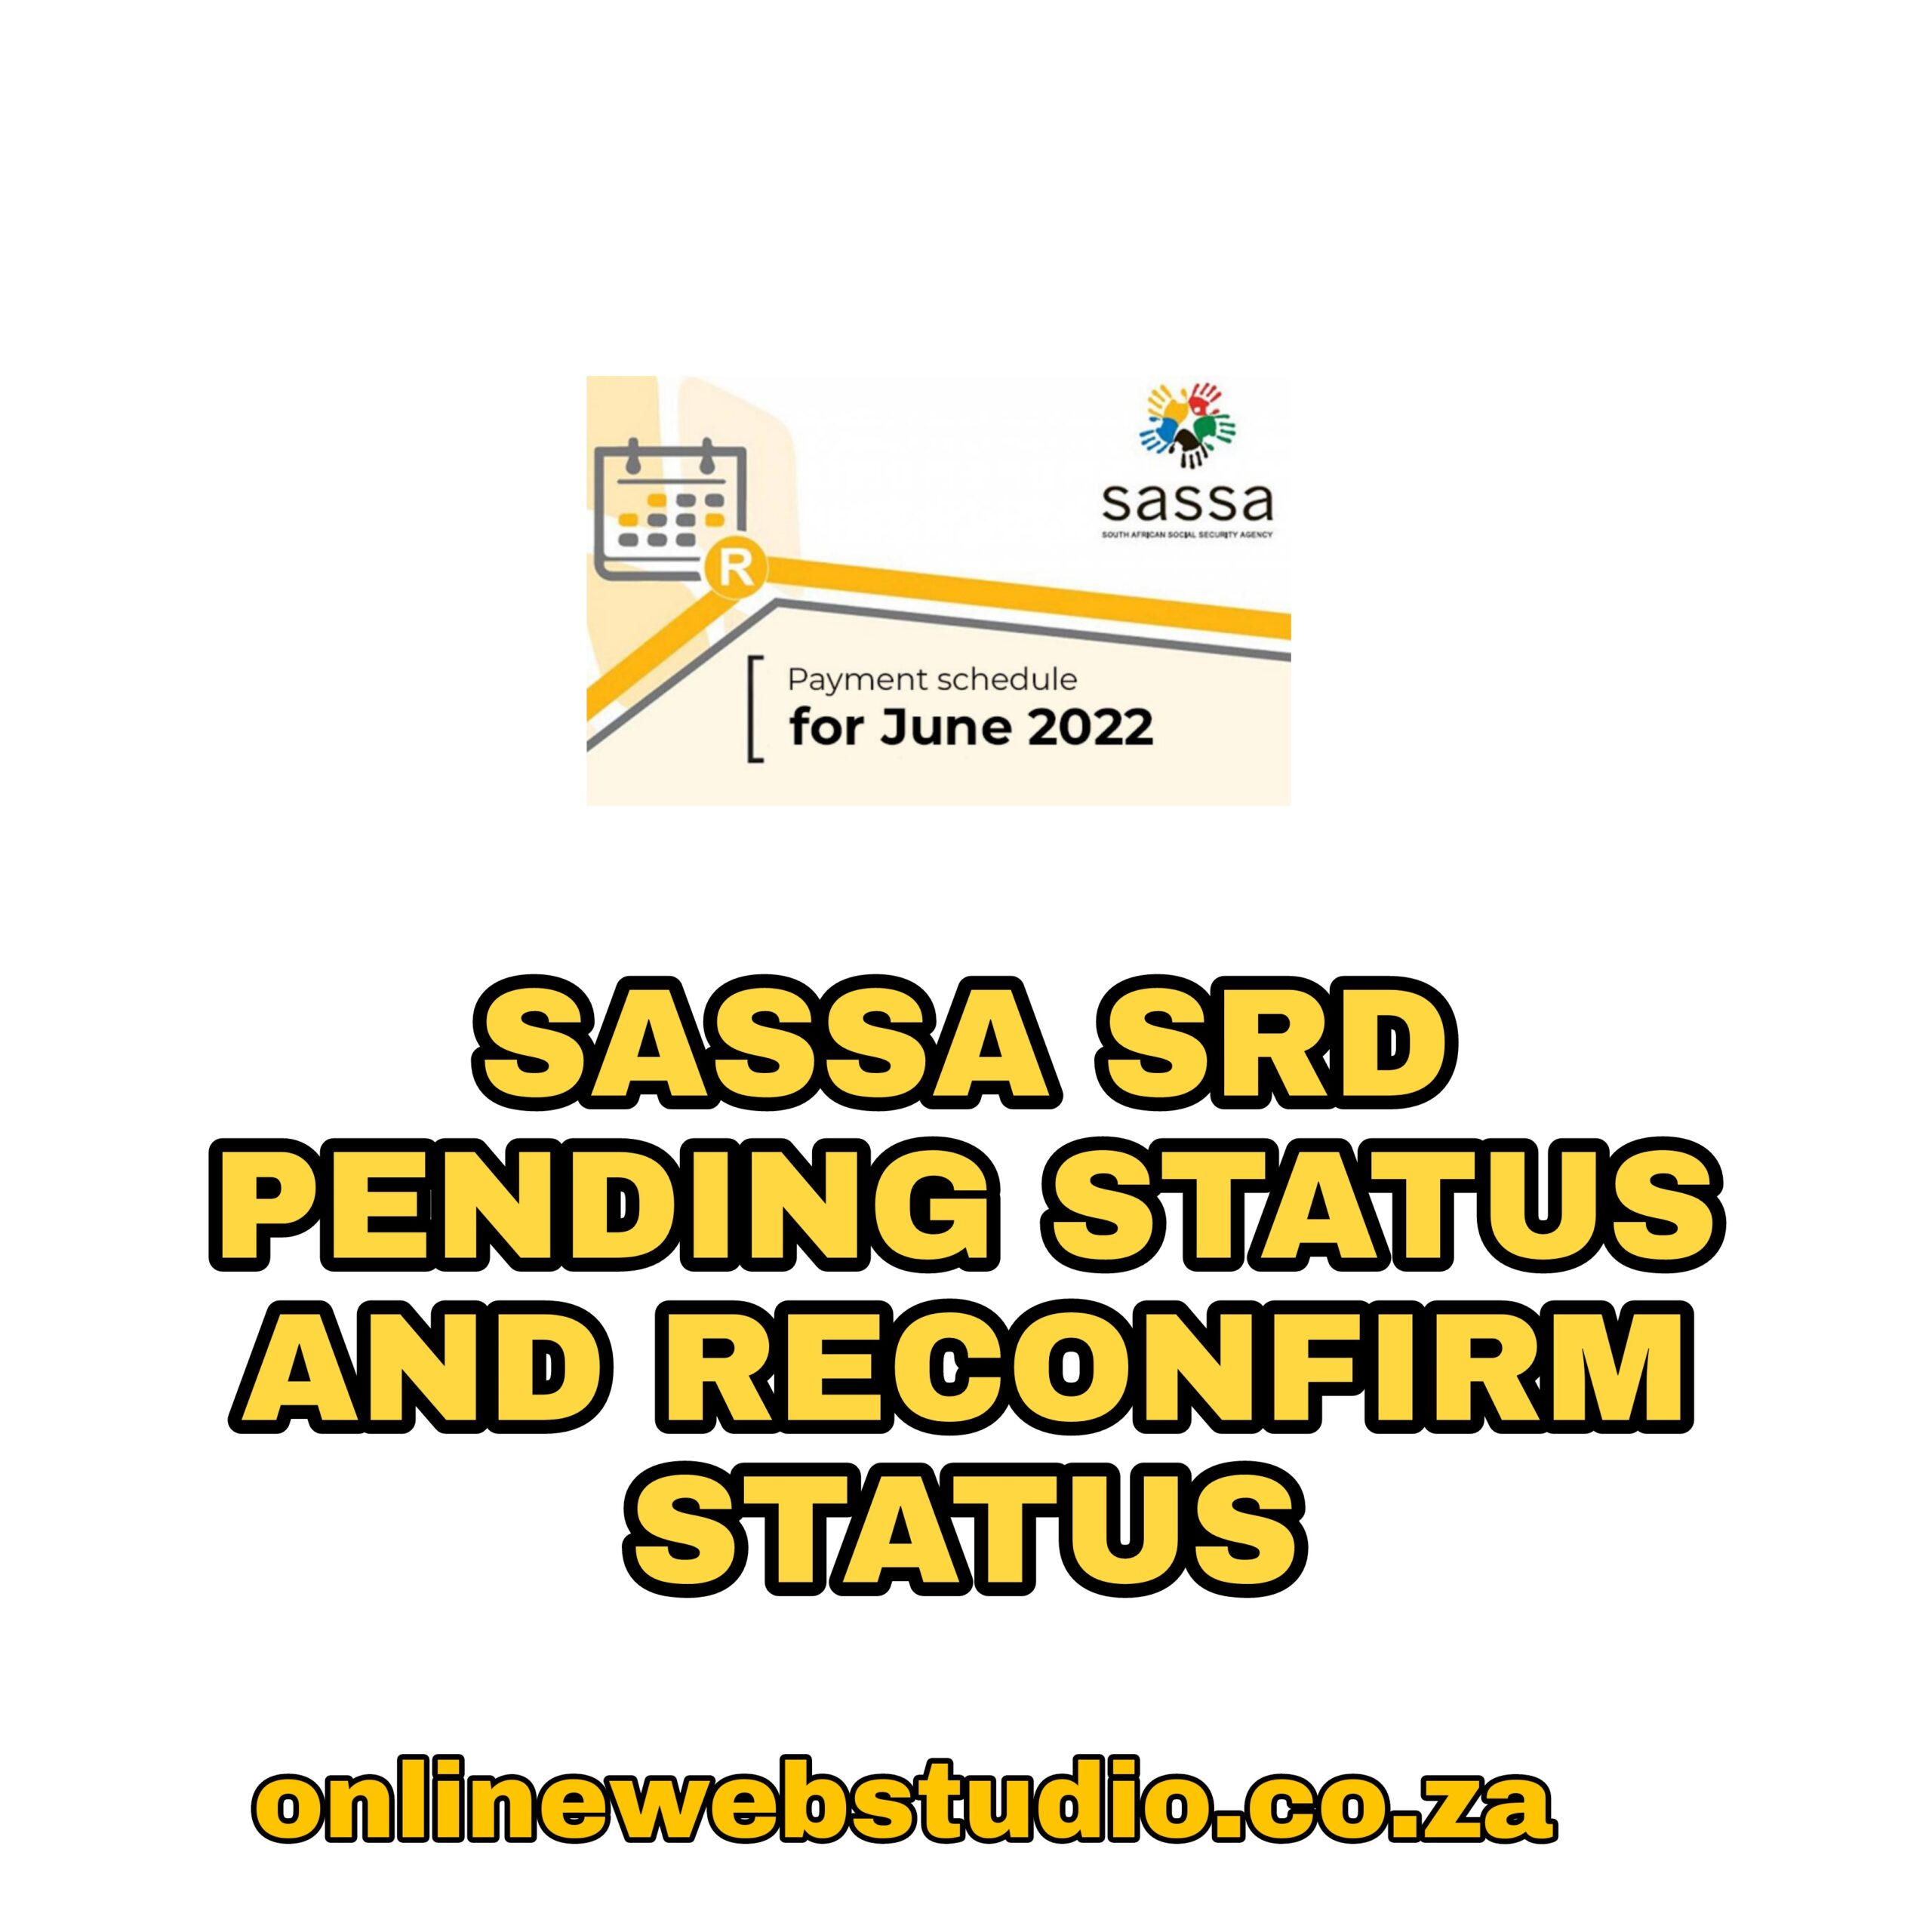 HOW TO CHECK SASSA SRD RECONFIRMATION AND PENDING DATES